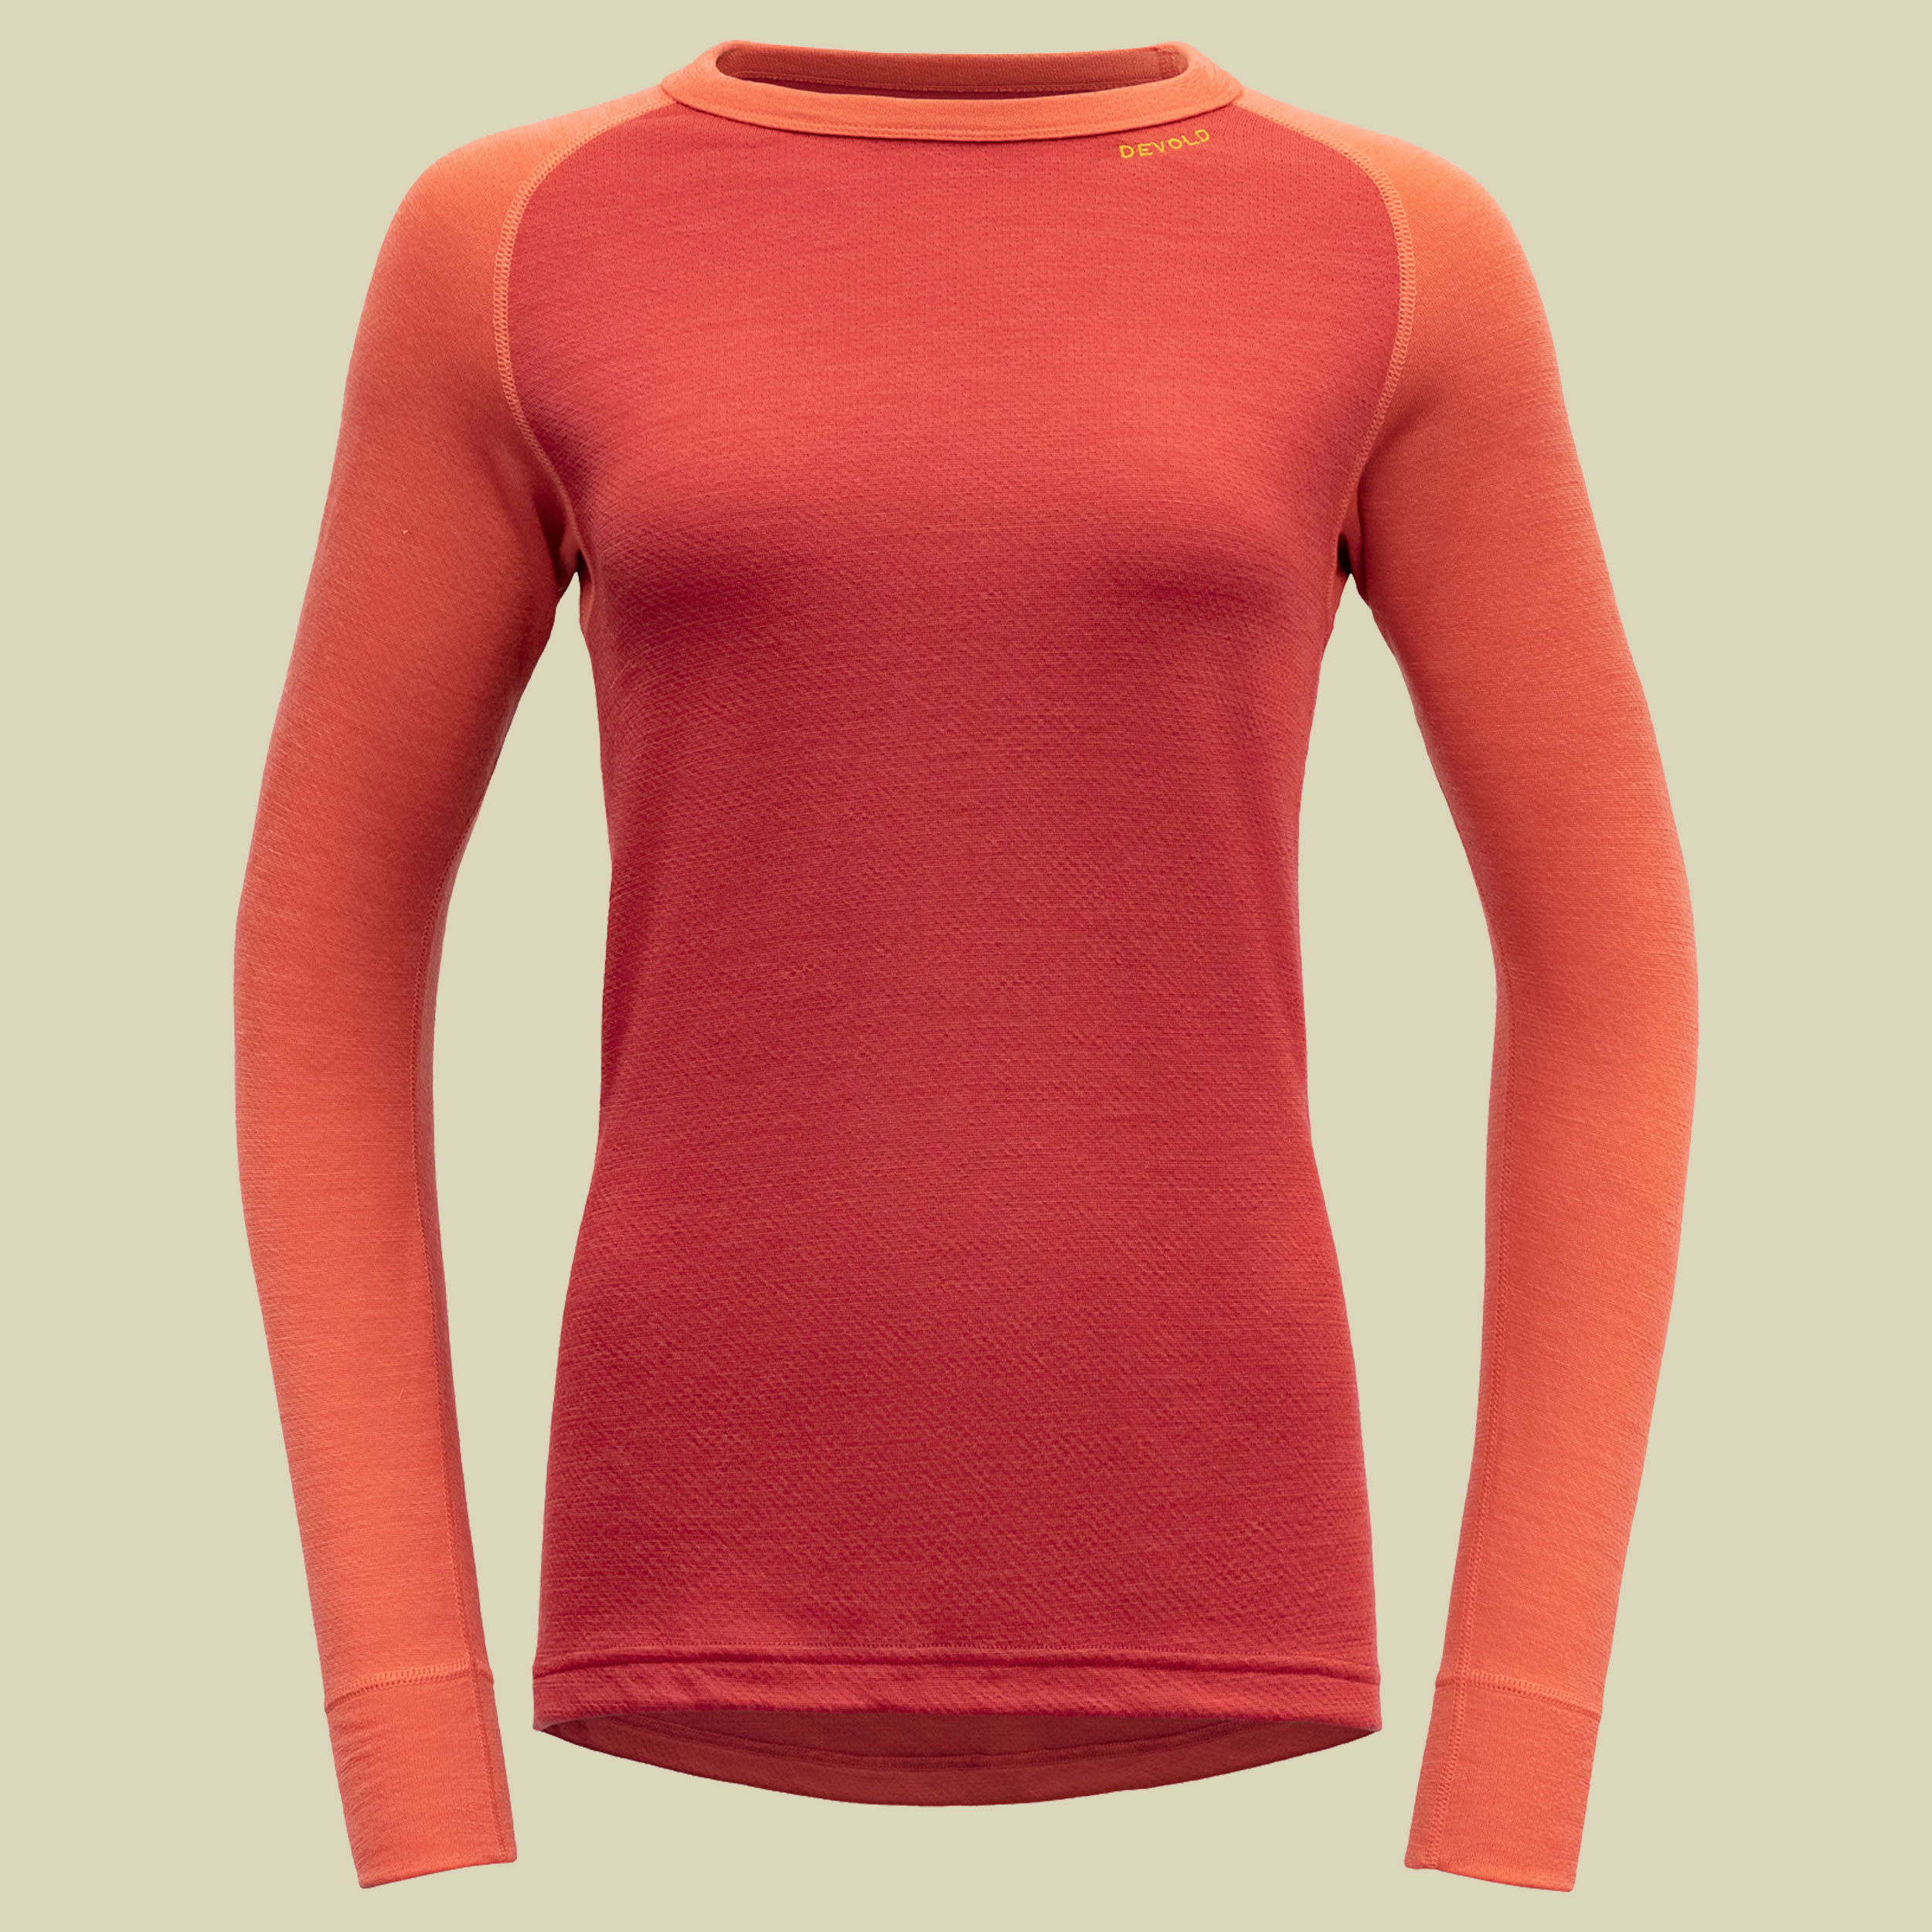 Expedition Merino 235 Shirt Woman Größe XL Farbe beauty/coral